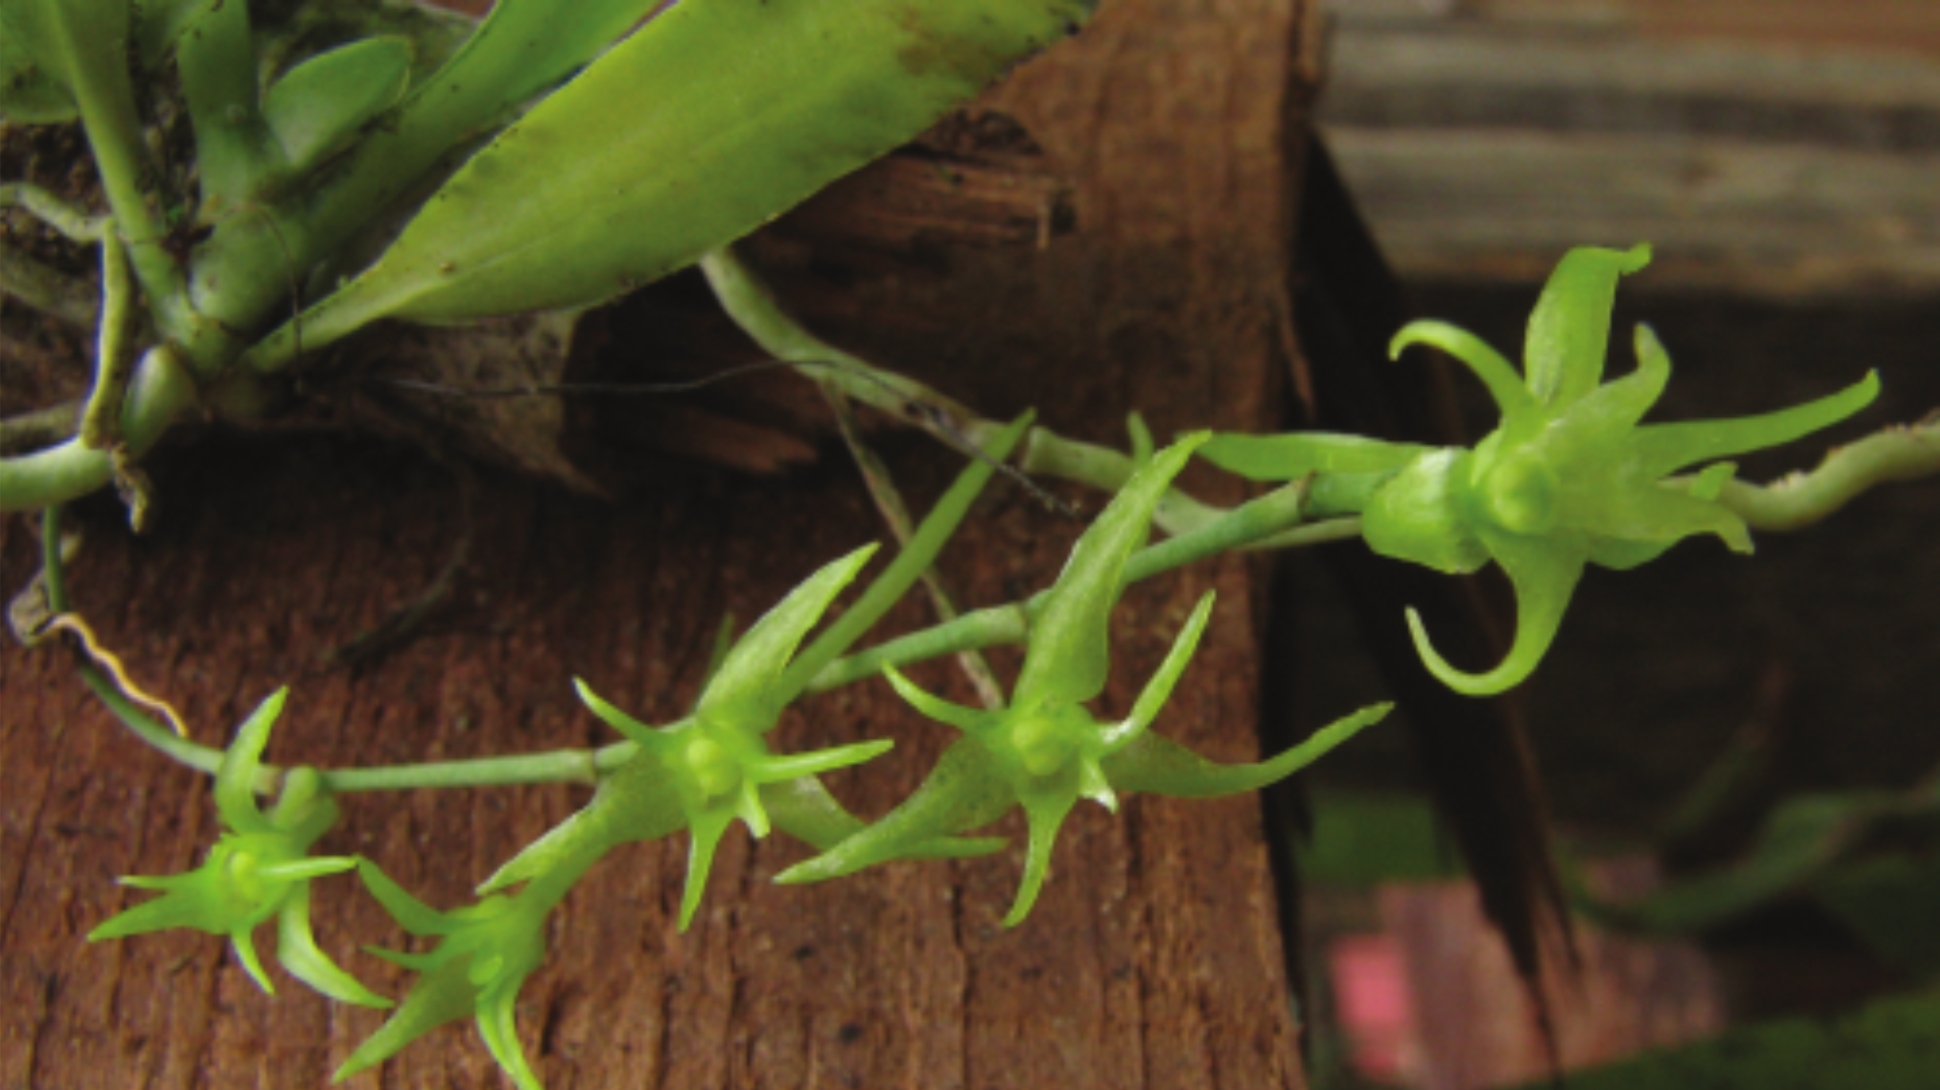 A long green tendril with stretched star-like green flowers